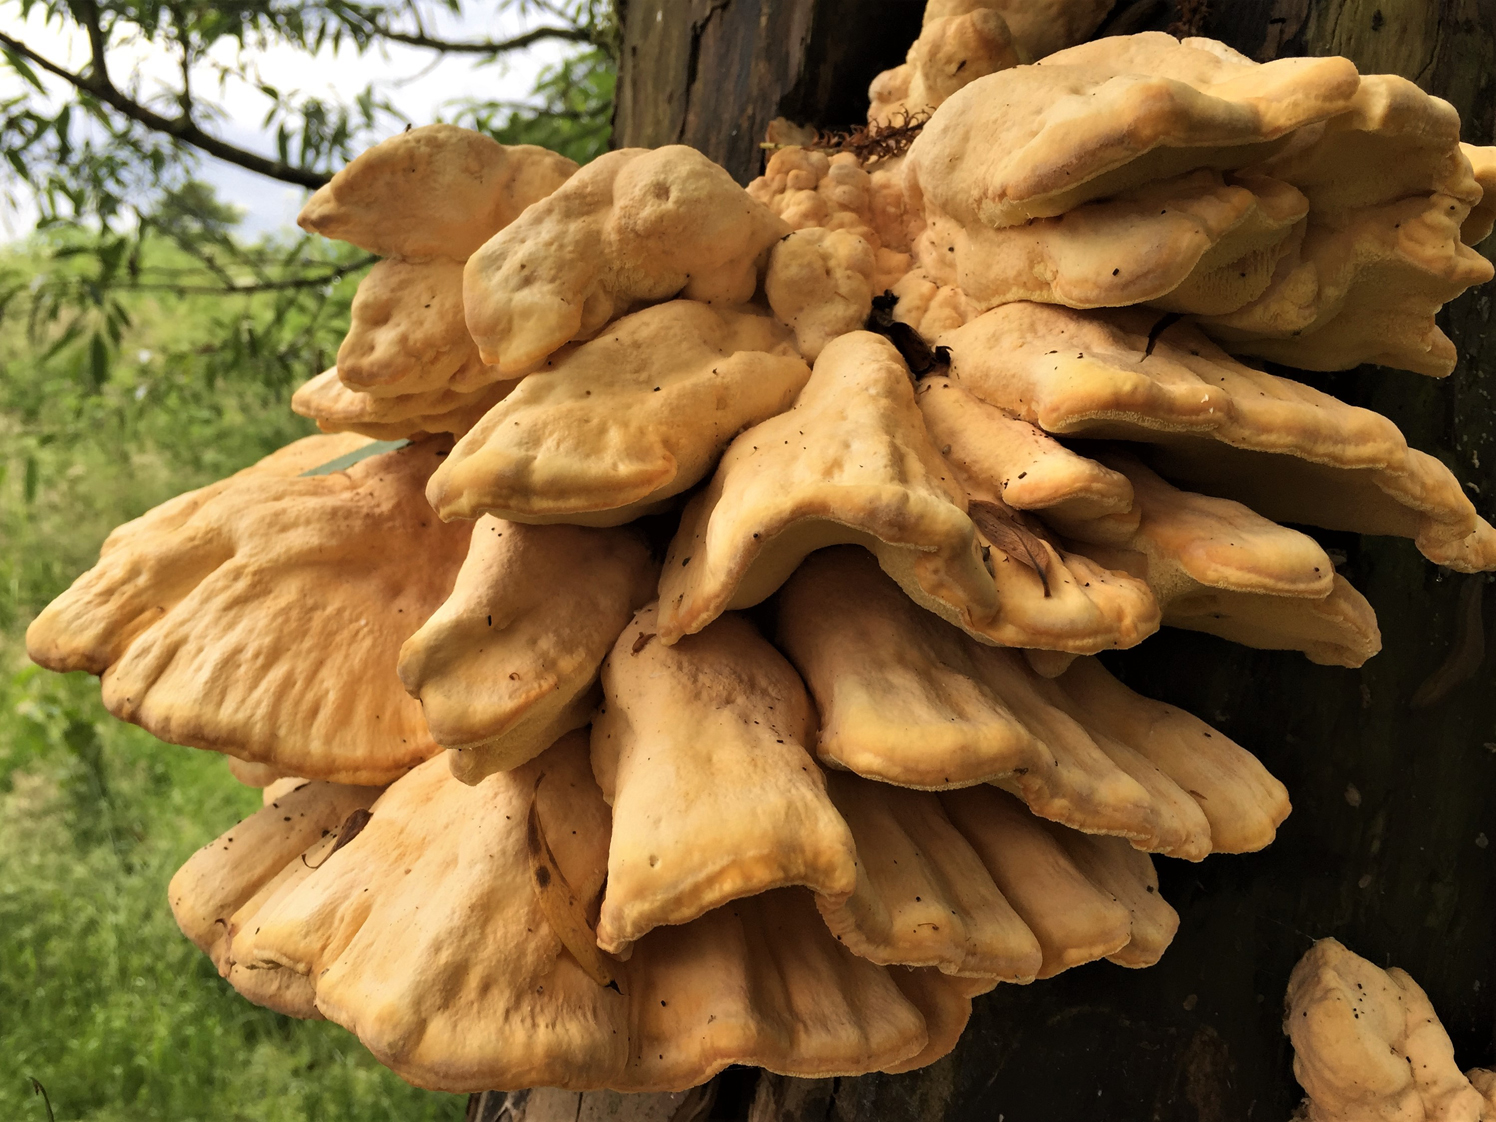 Chicken of the woods mushroom cluster on side of tree